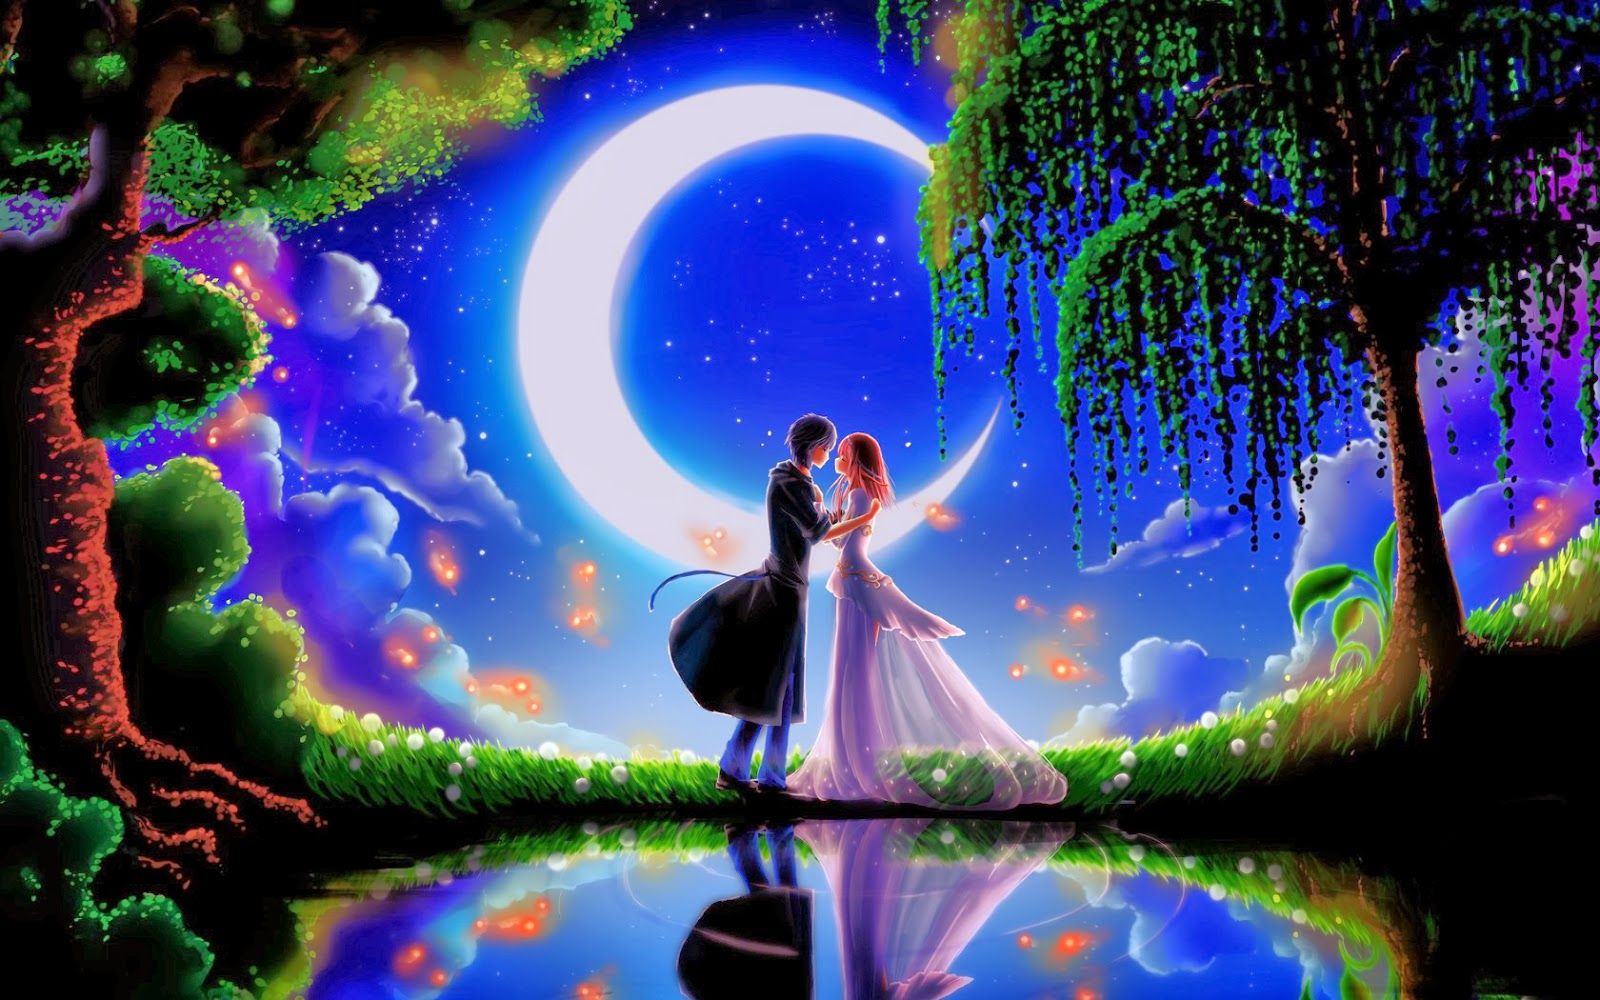 Romantic Love Picture for her and Kiss, Couples Dance in Moonlight Wallpaper, Image, Photo. Wallpaper HD Free